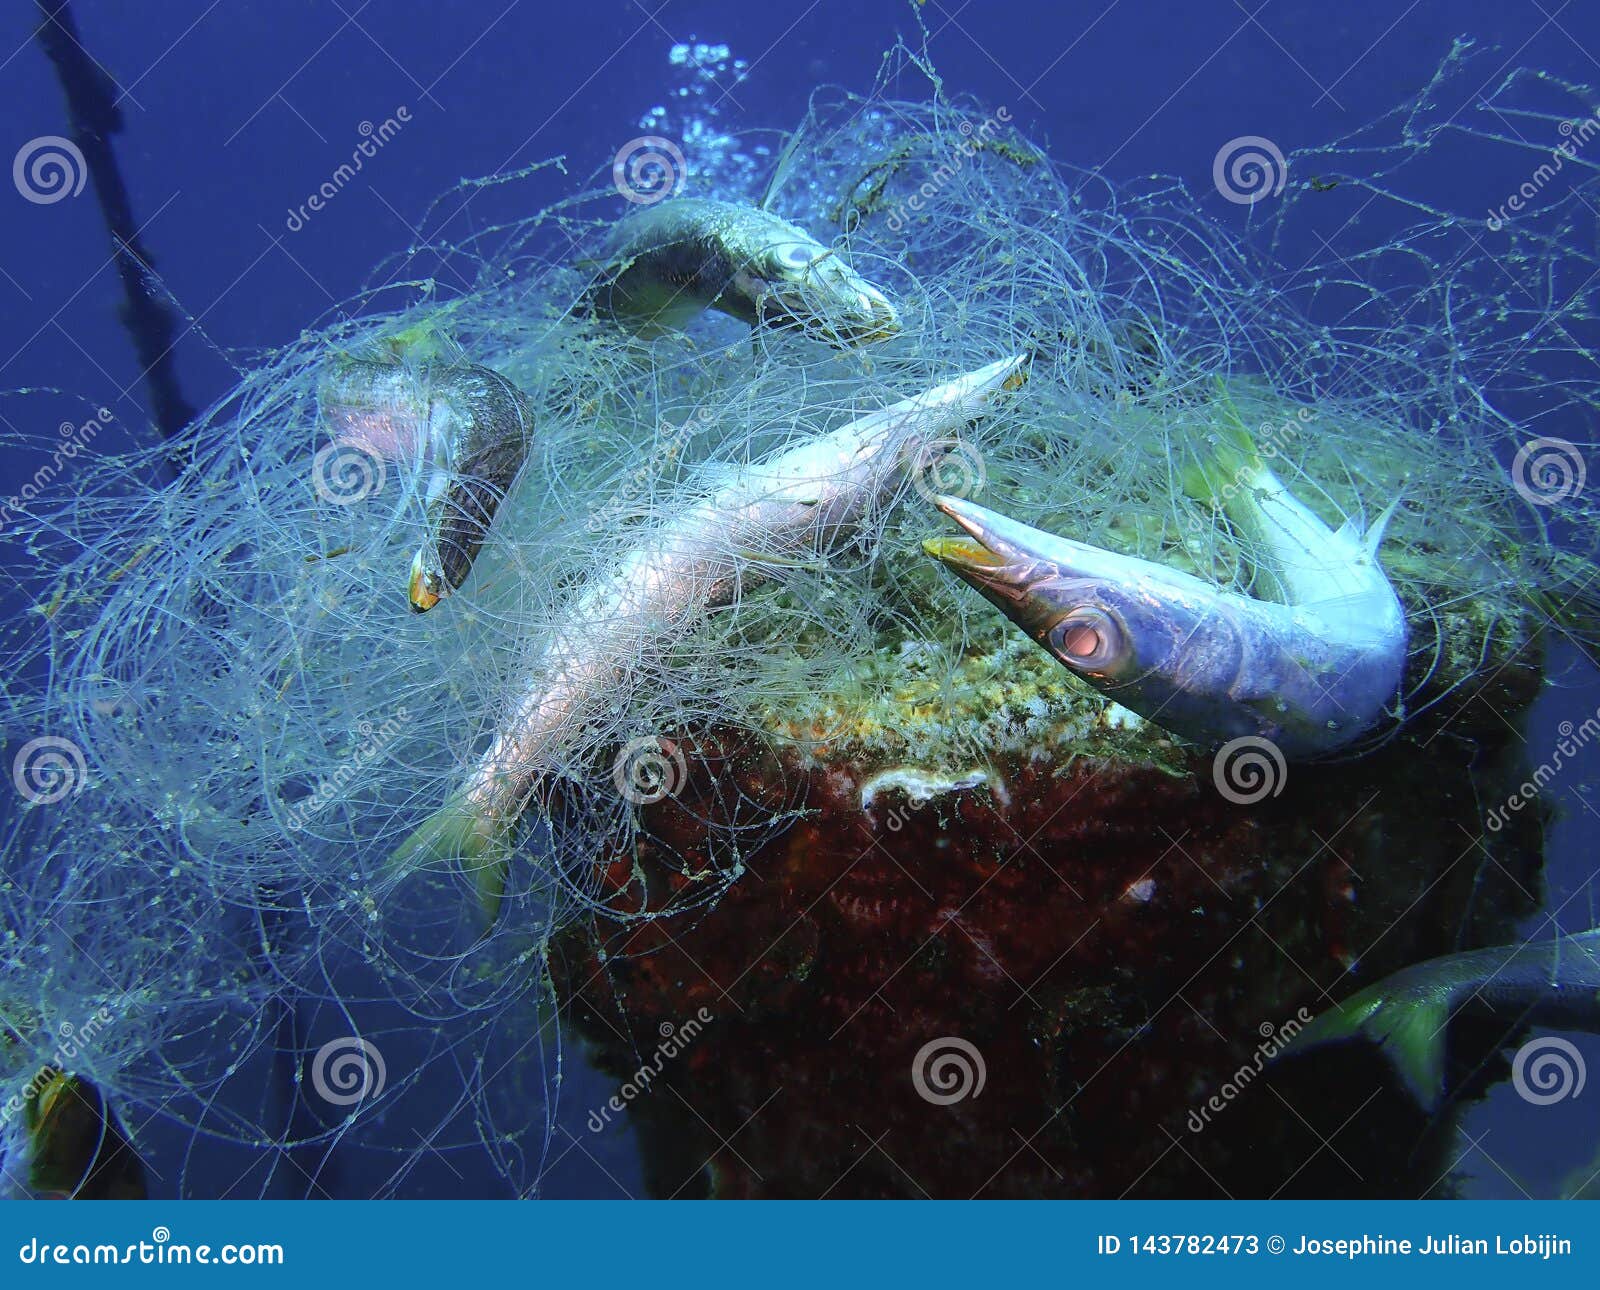 Ghost Nets are Commercial Fishing Nets that Have Been Lost